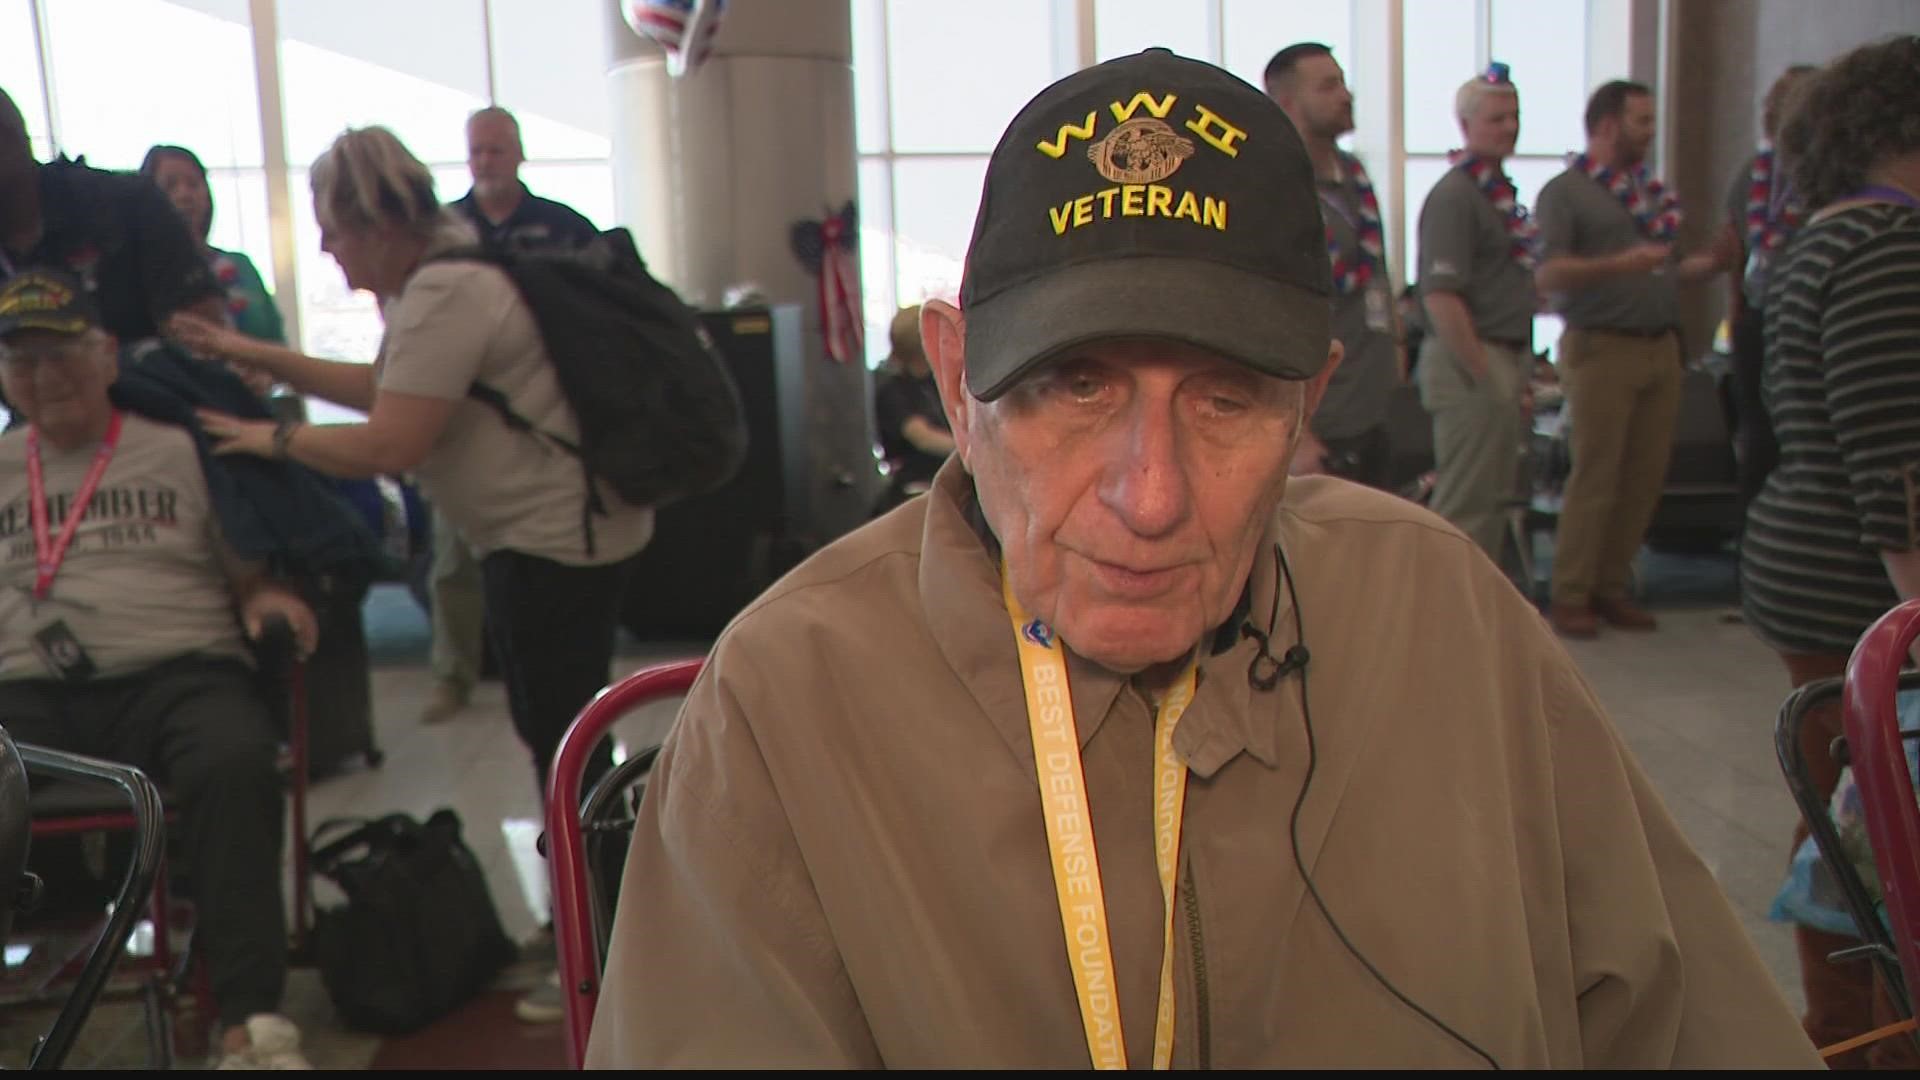 Veterans will participate in week-long events leading up to June 6.